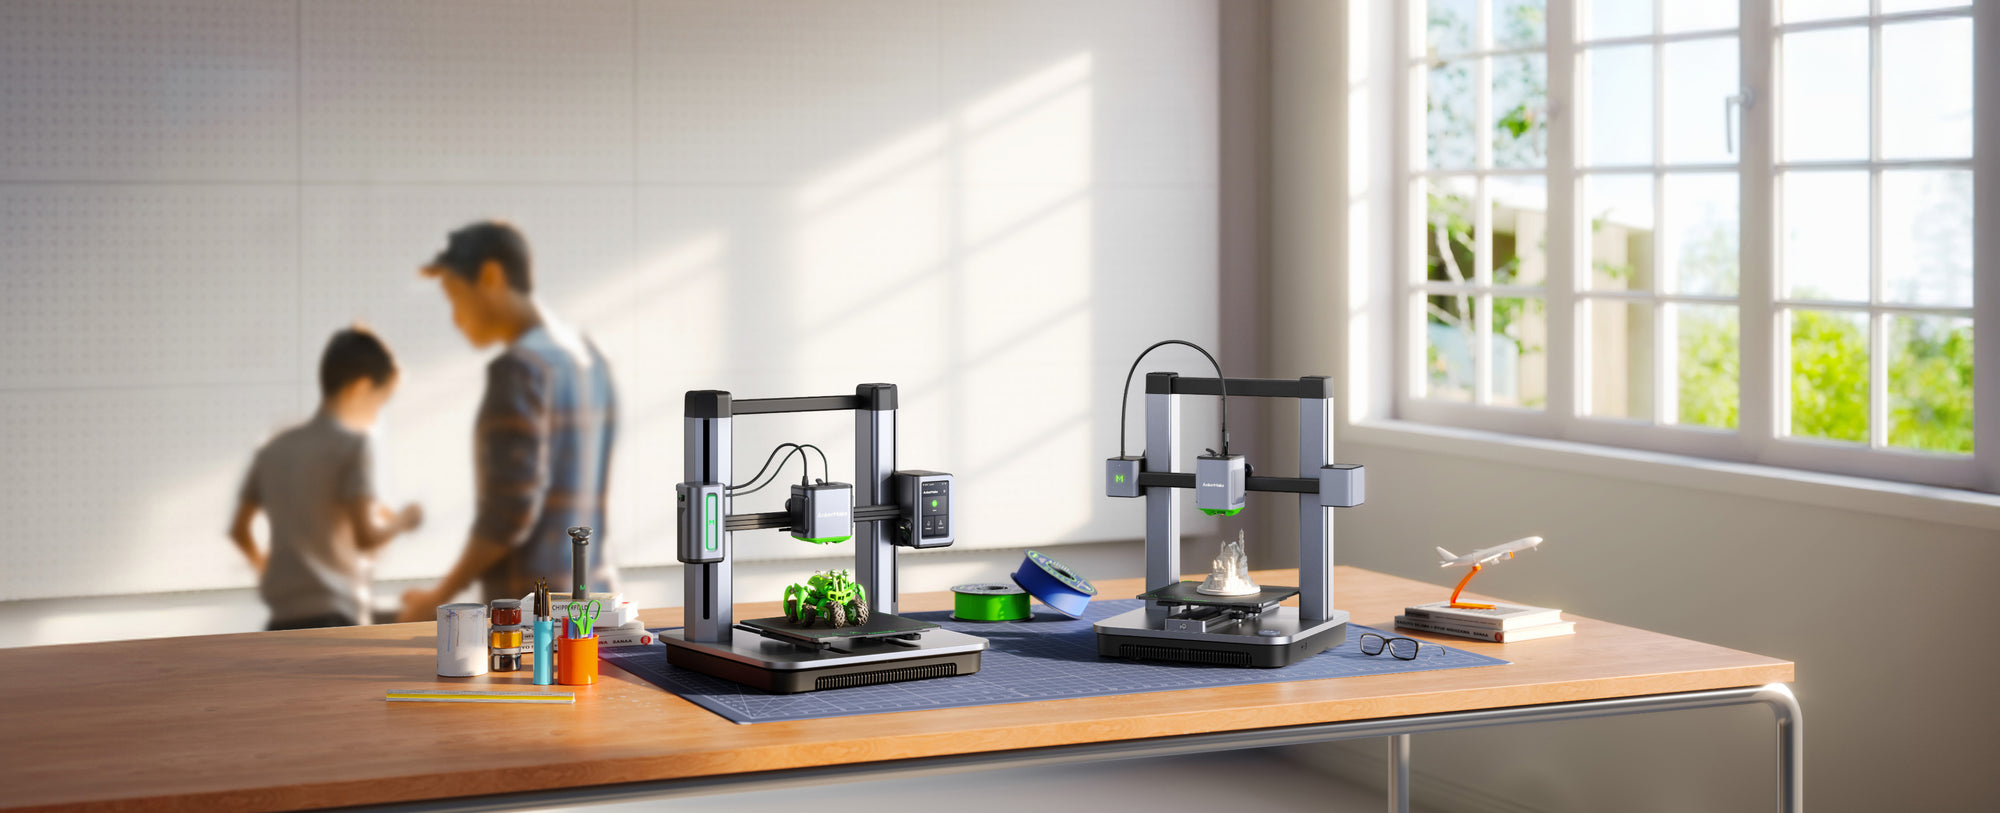 Top 3D Models to Print for Your Dad